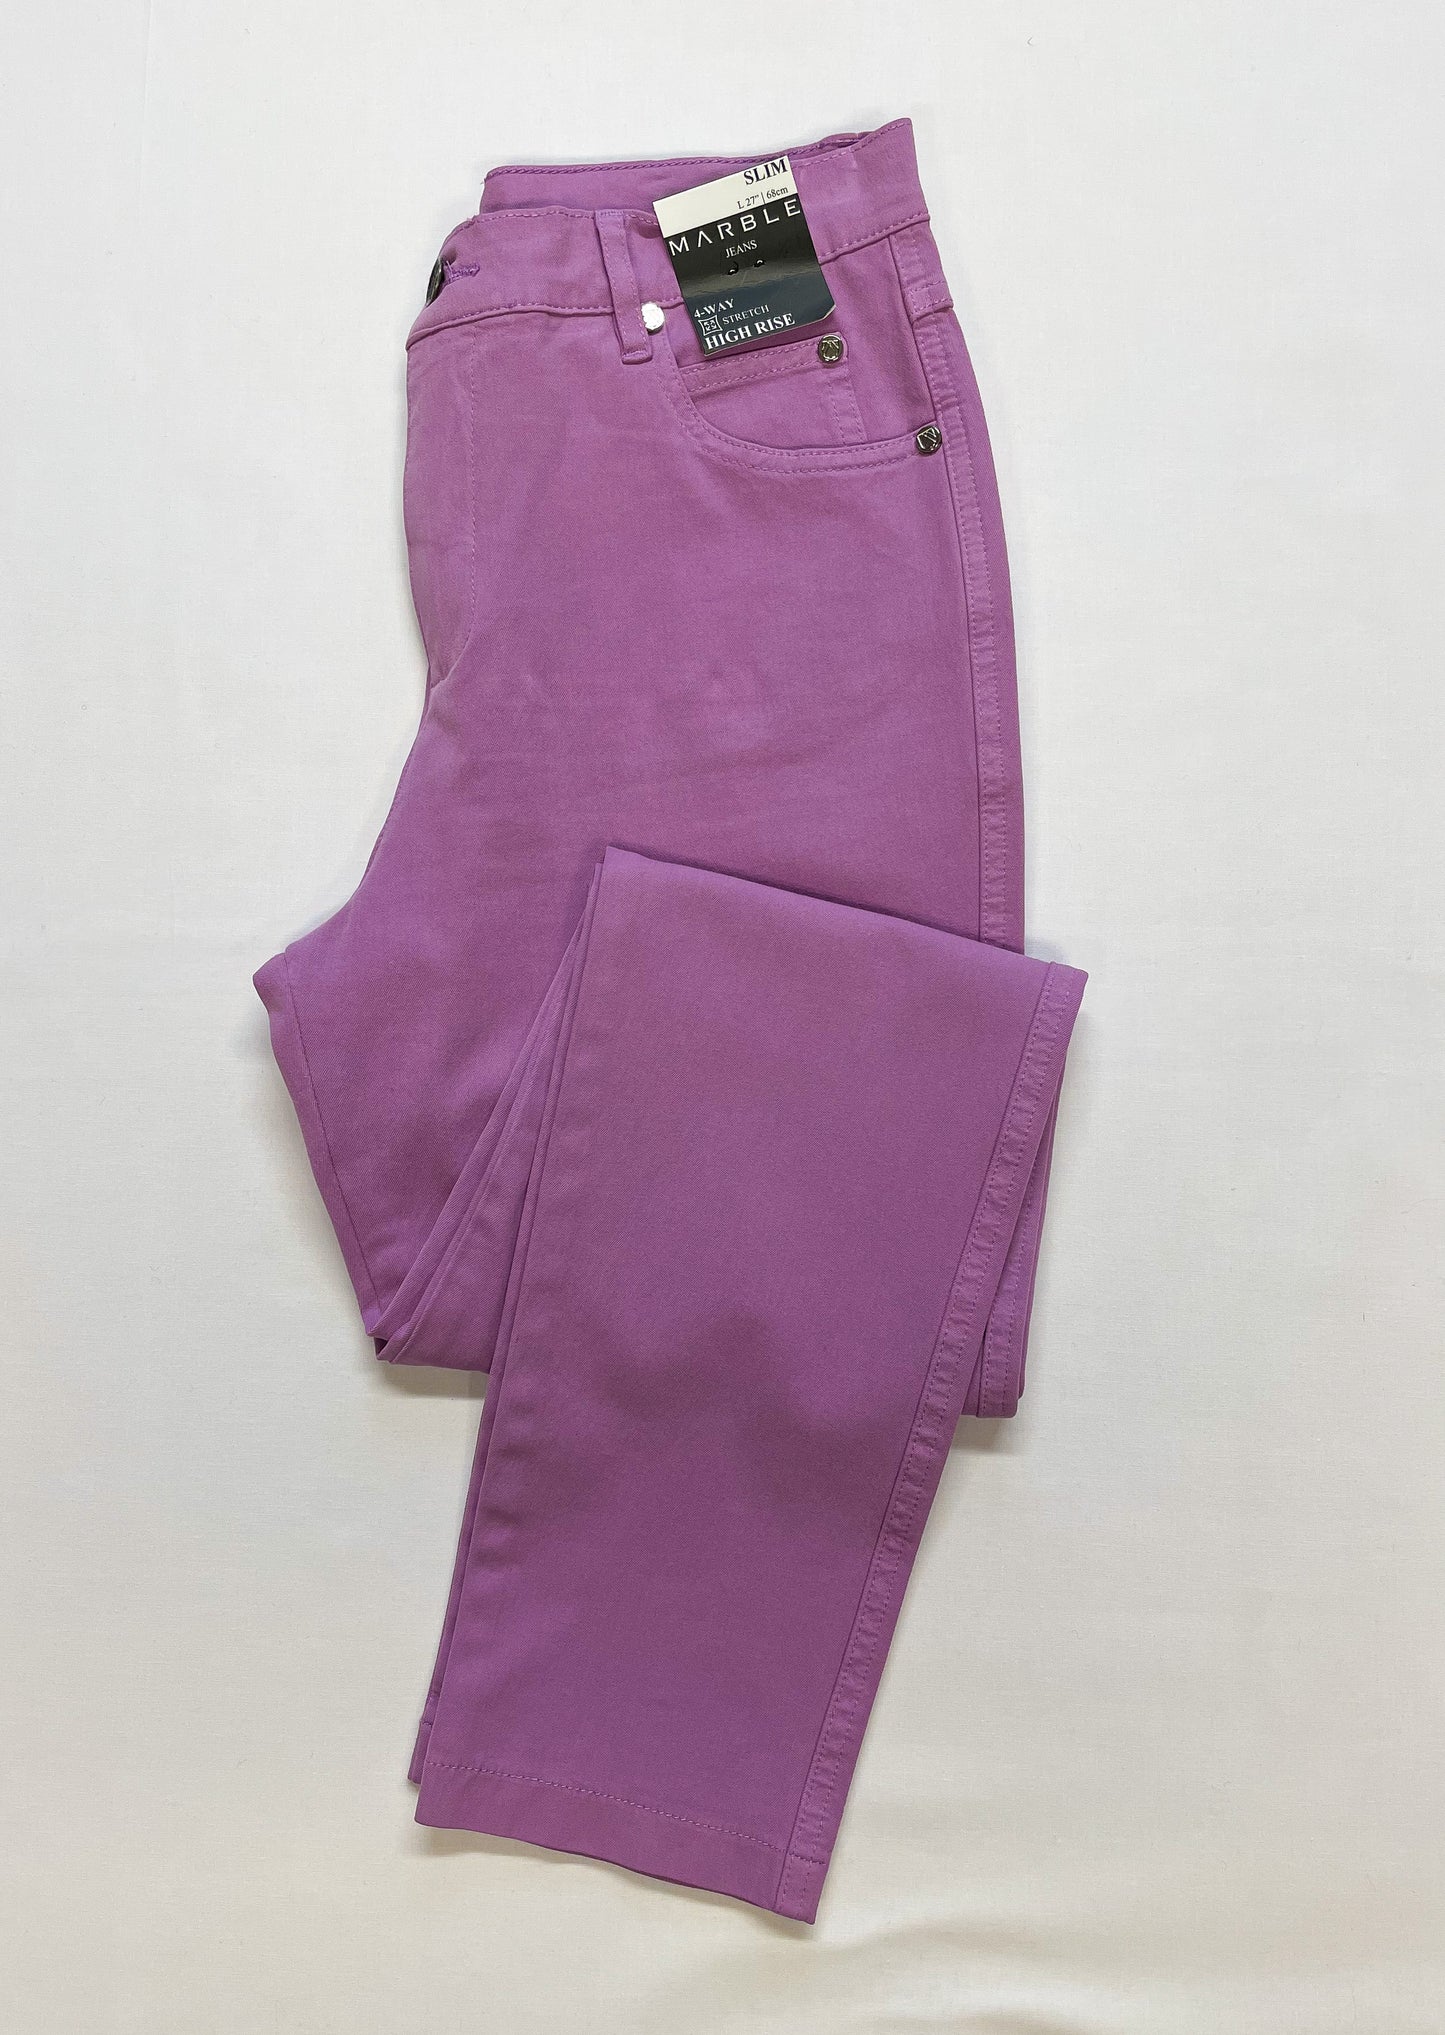 Lilac 7/8th Jeans